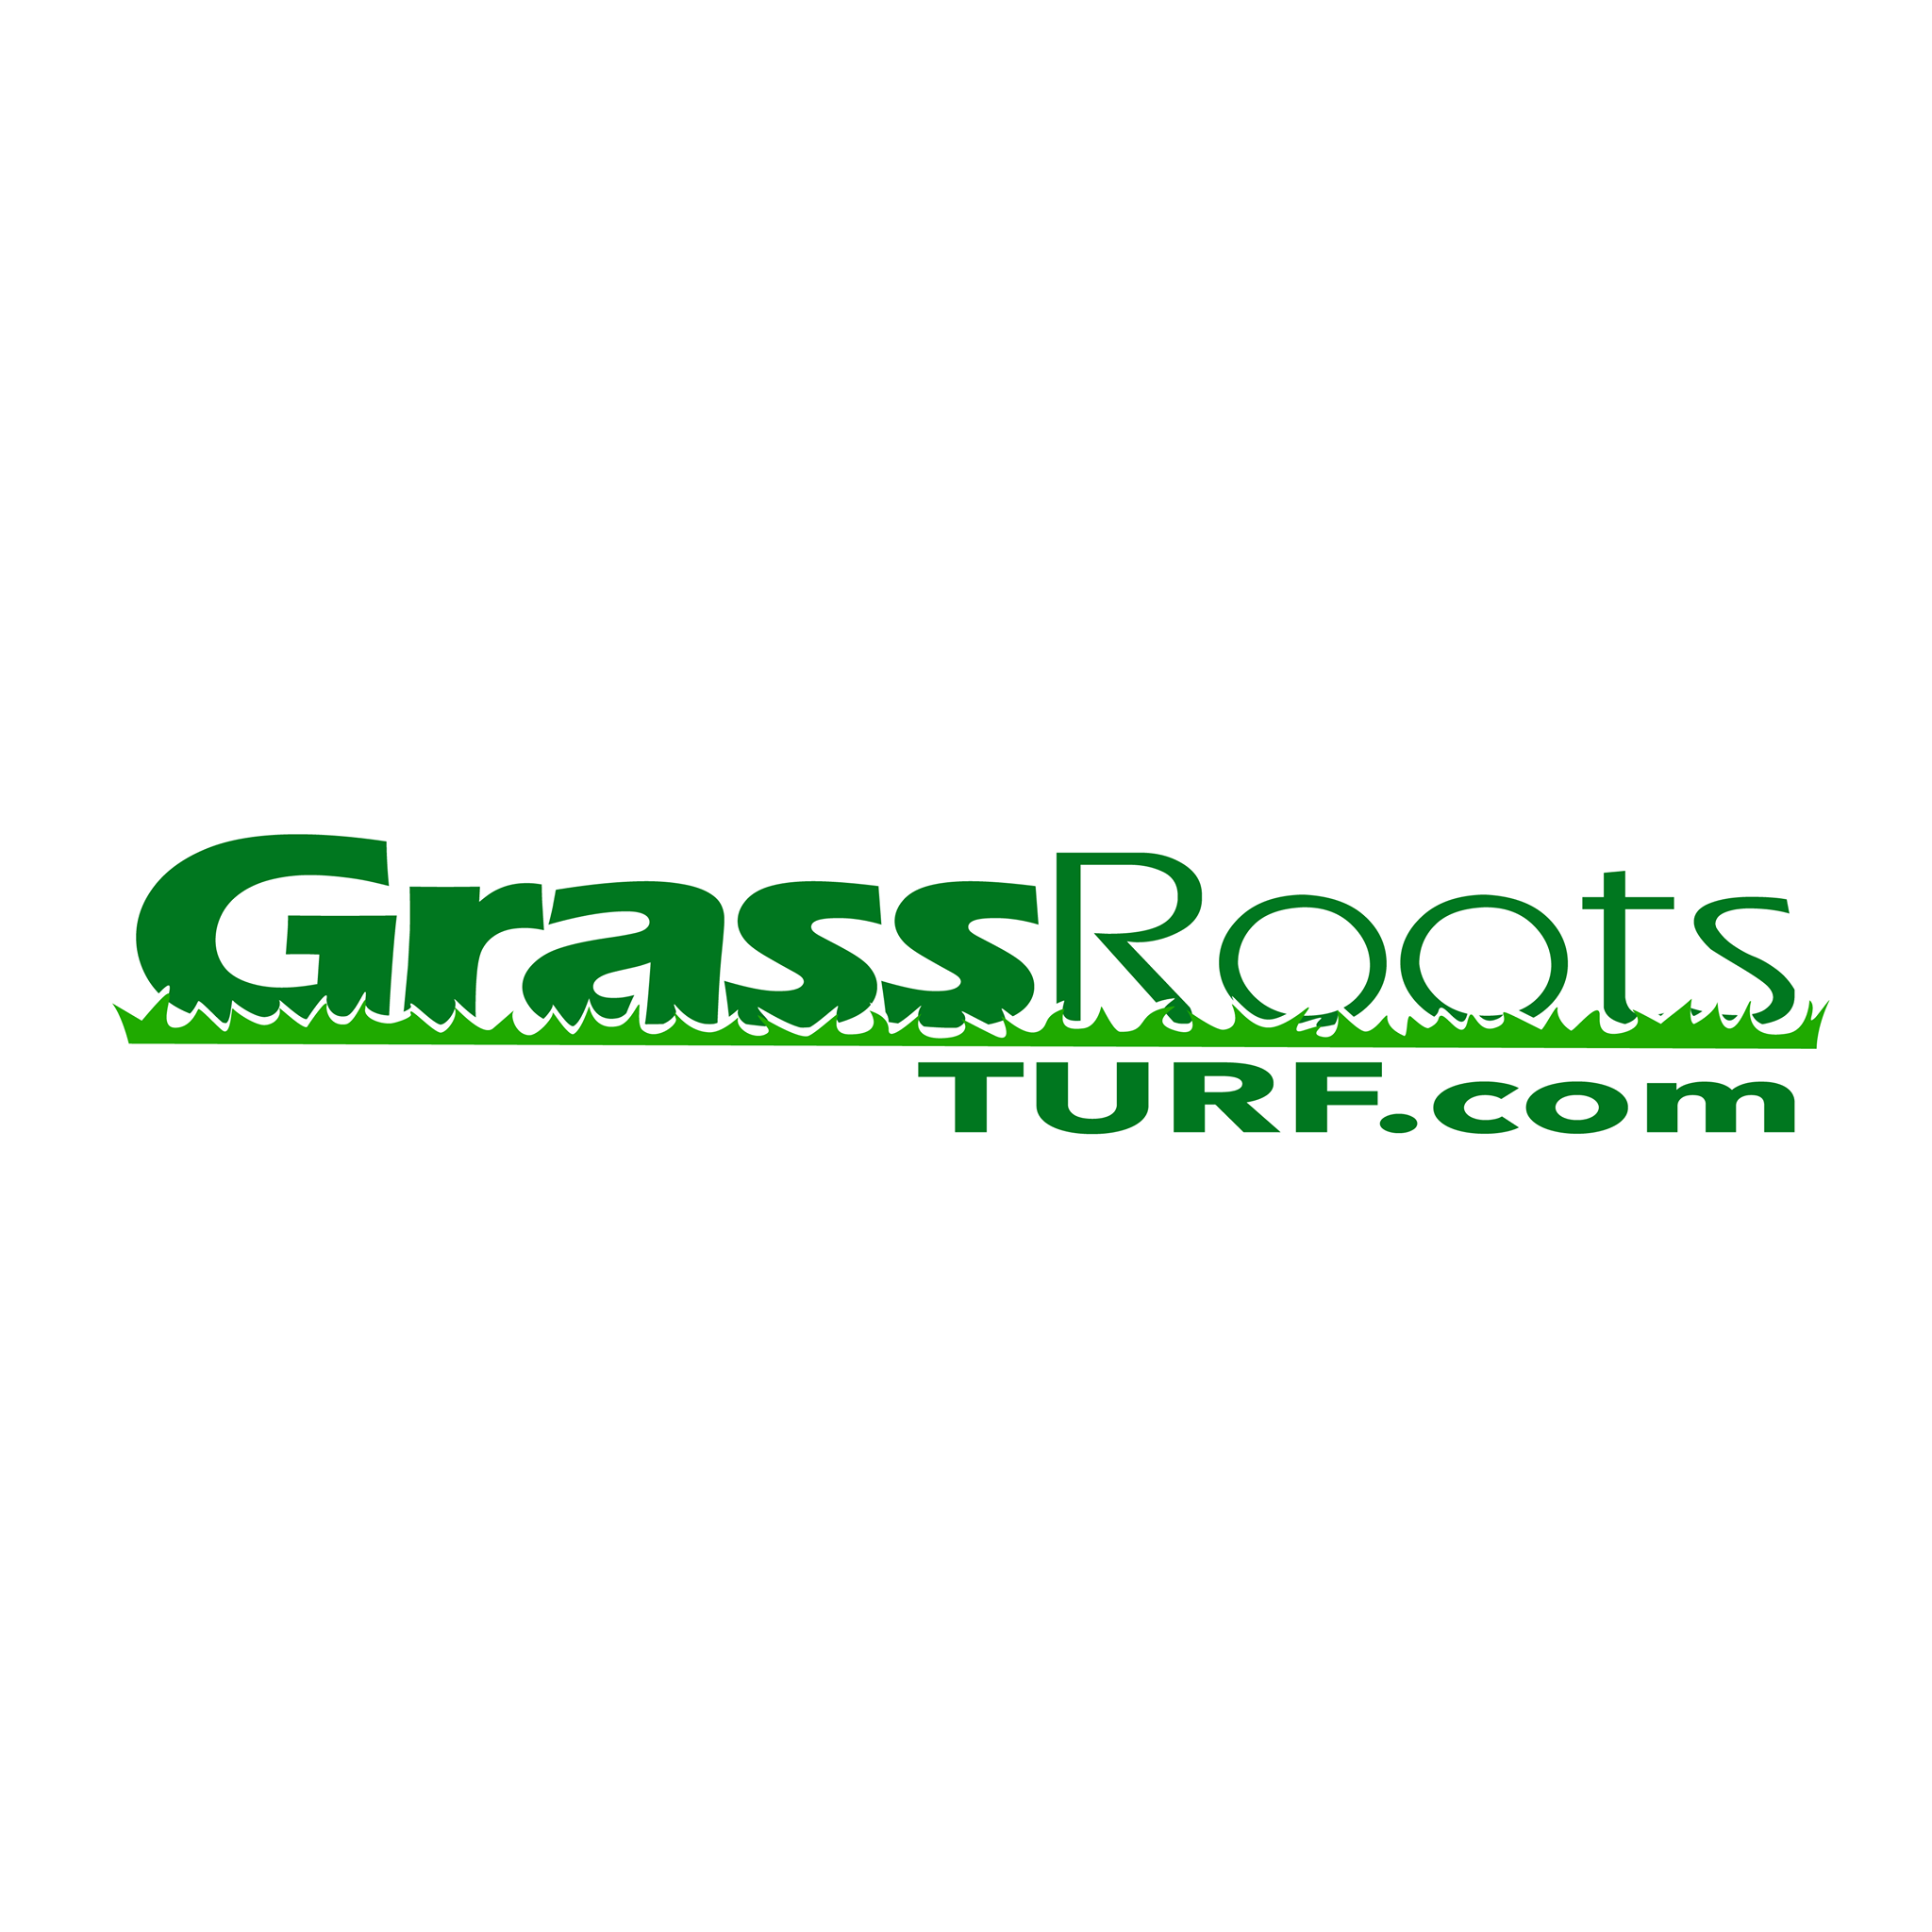 GrassRoots Turf & Lawn Care of Central MS